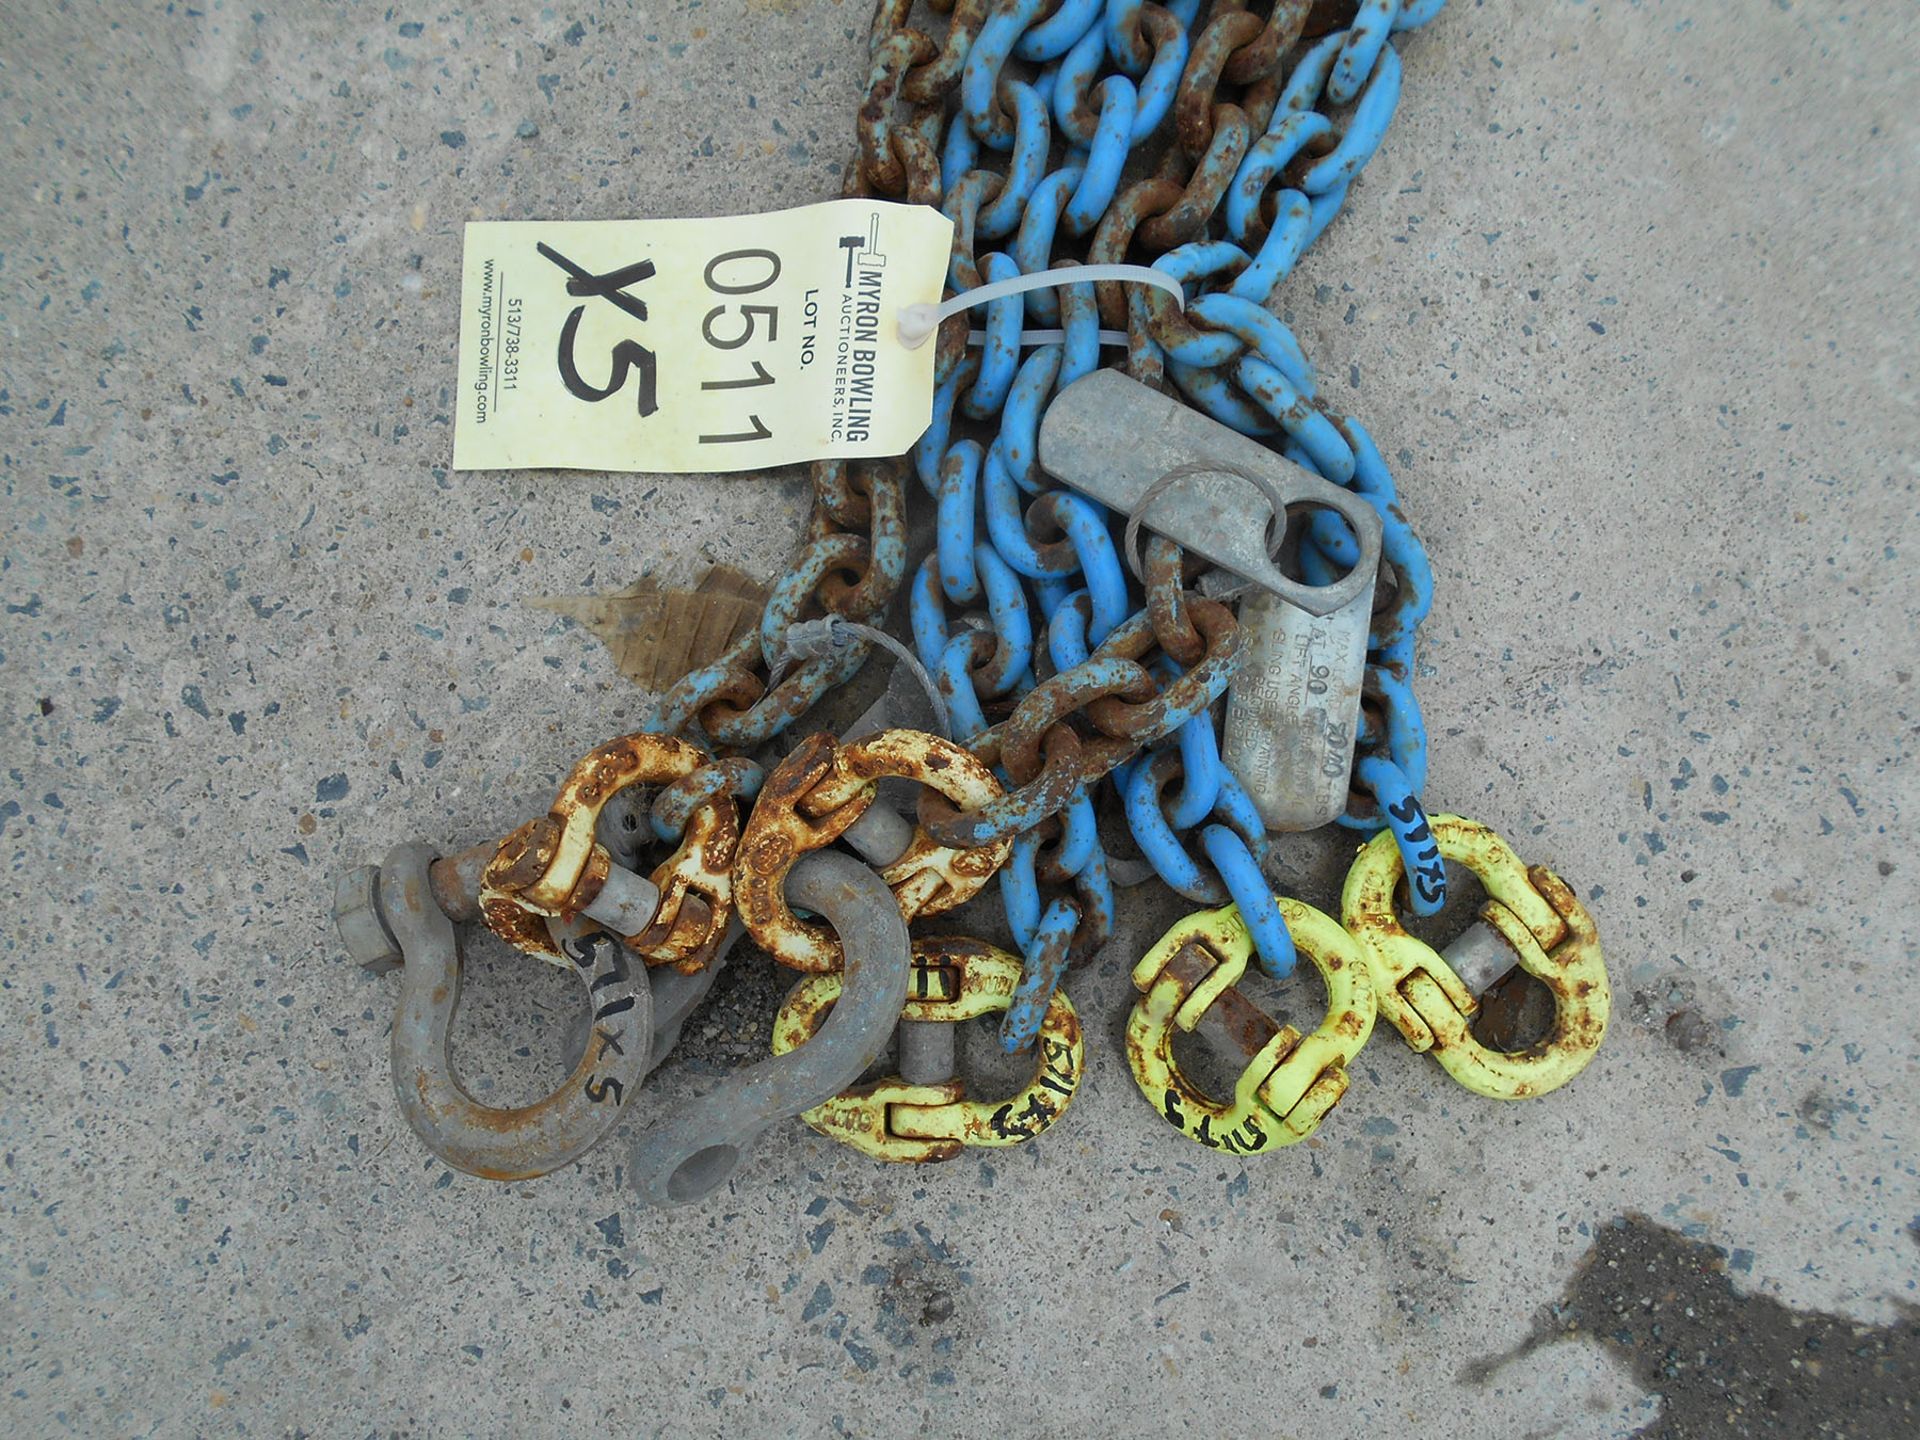 (5) RIGGING CHAINS WITH SHACKLES; REACH 24', SIZE 3/8'', GRADE 10